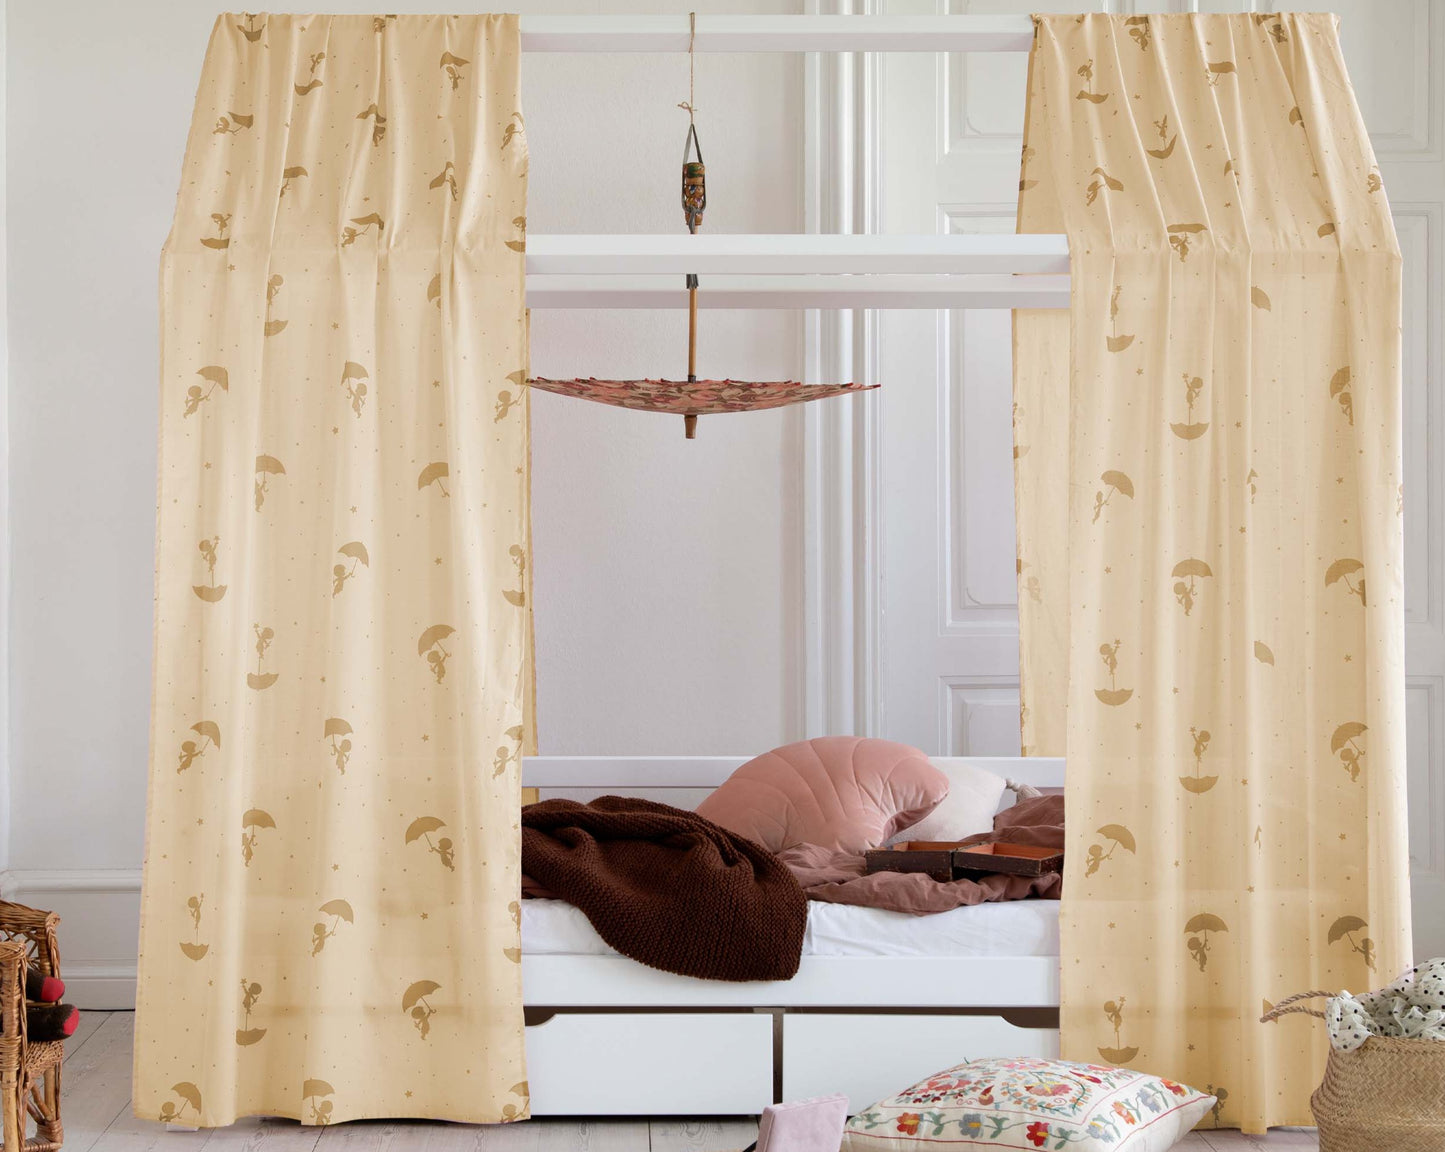 Ole Lukoie - Roof curtains for House beds - 90x200 cm - Yellow